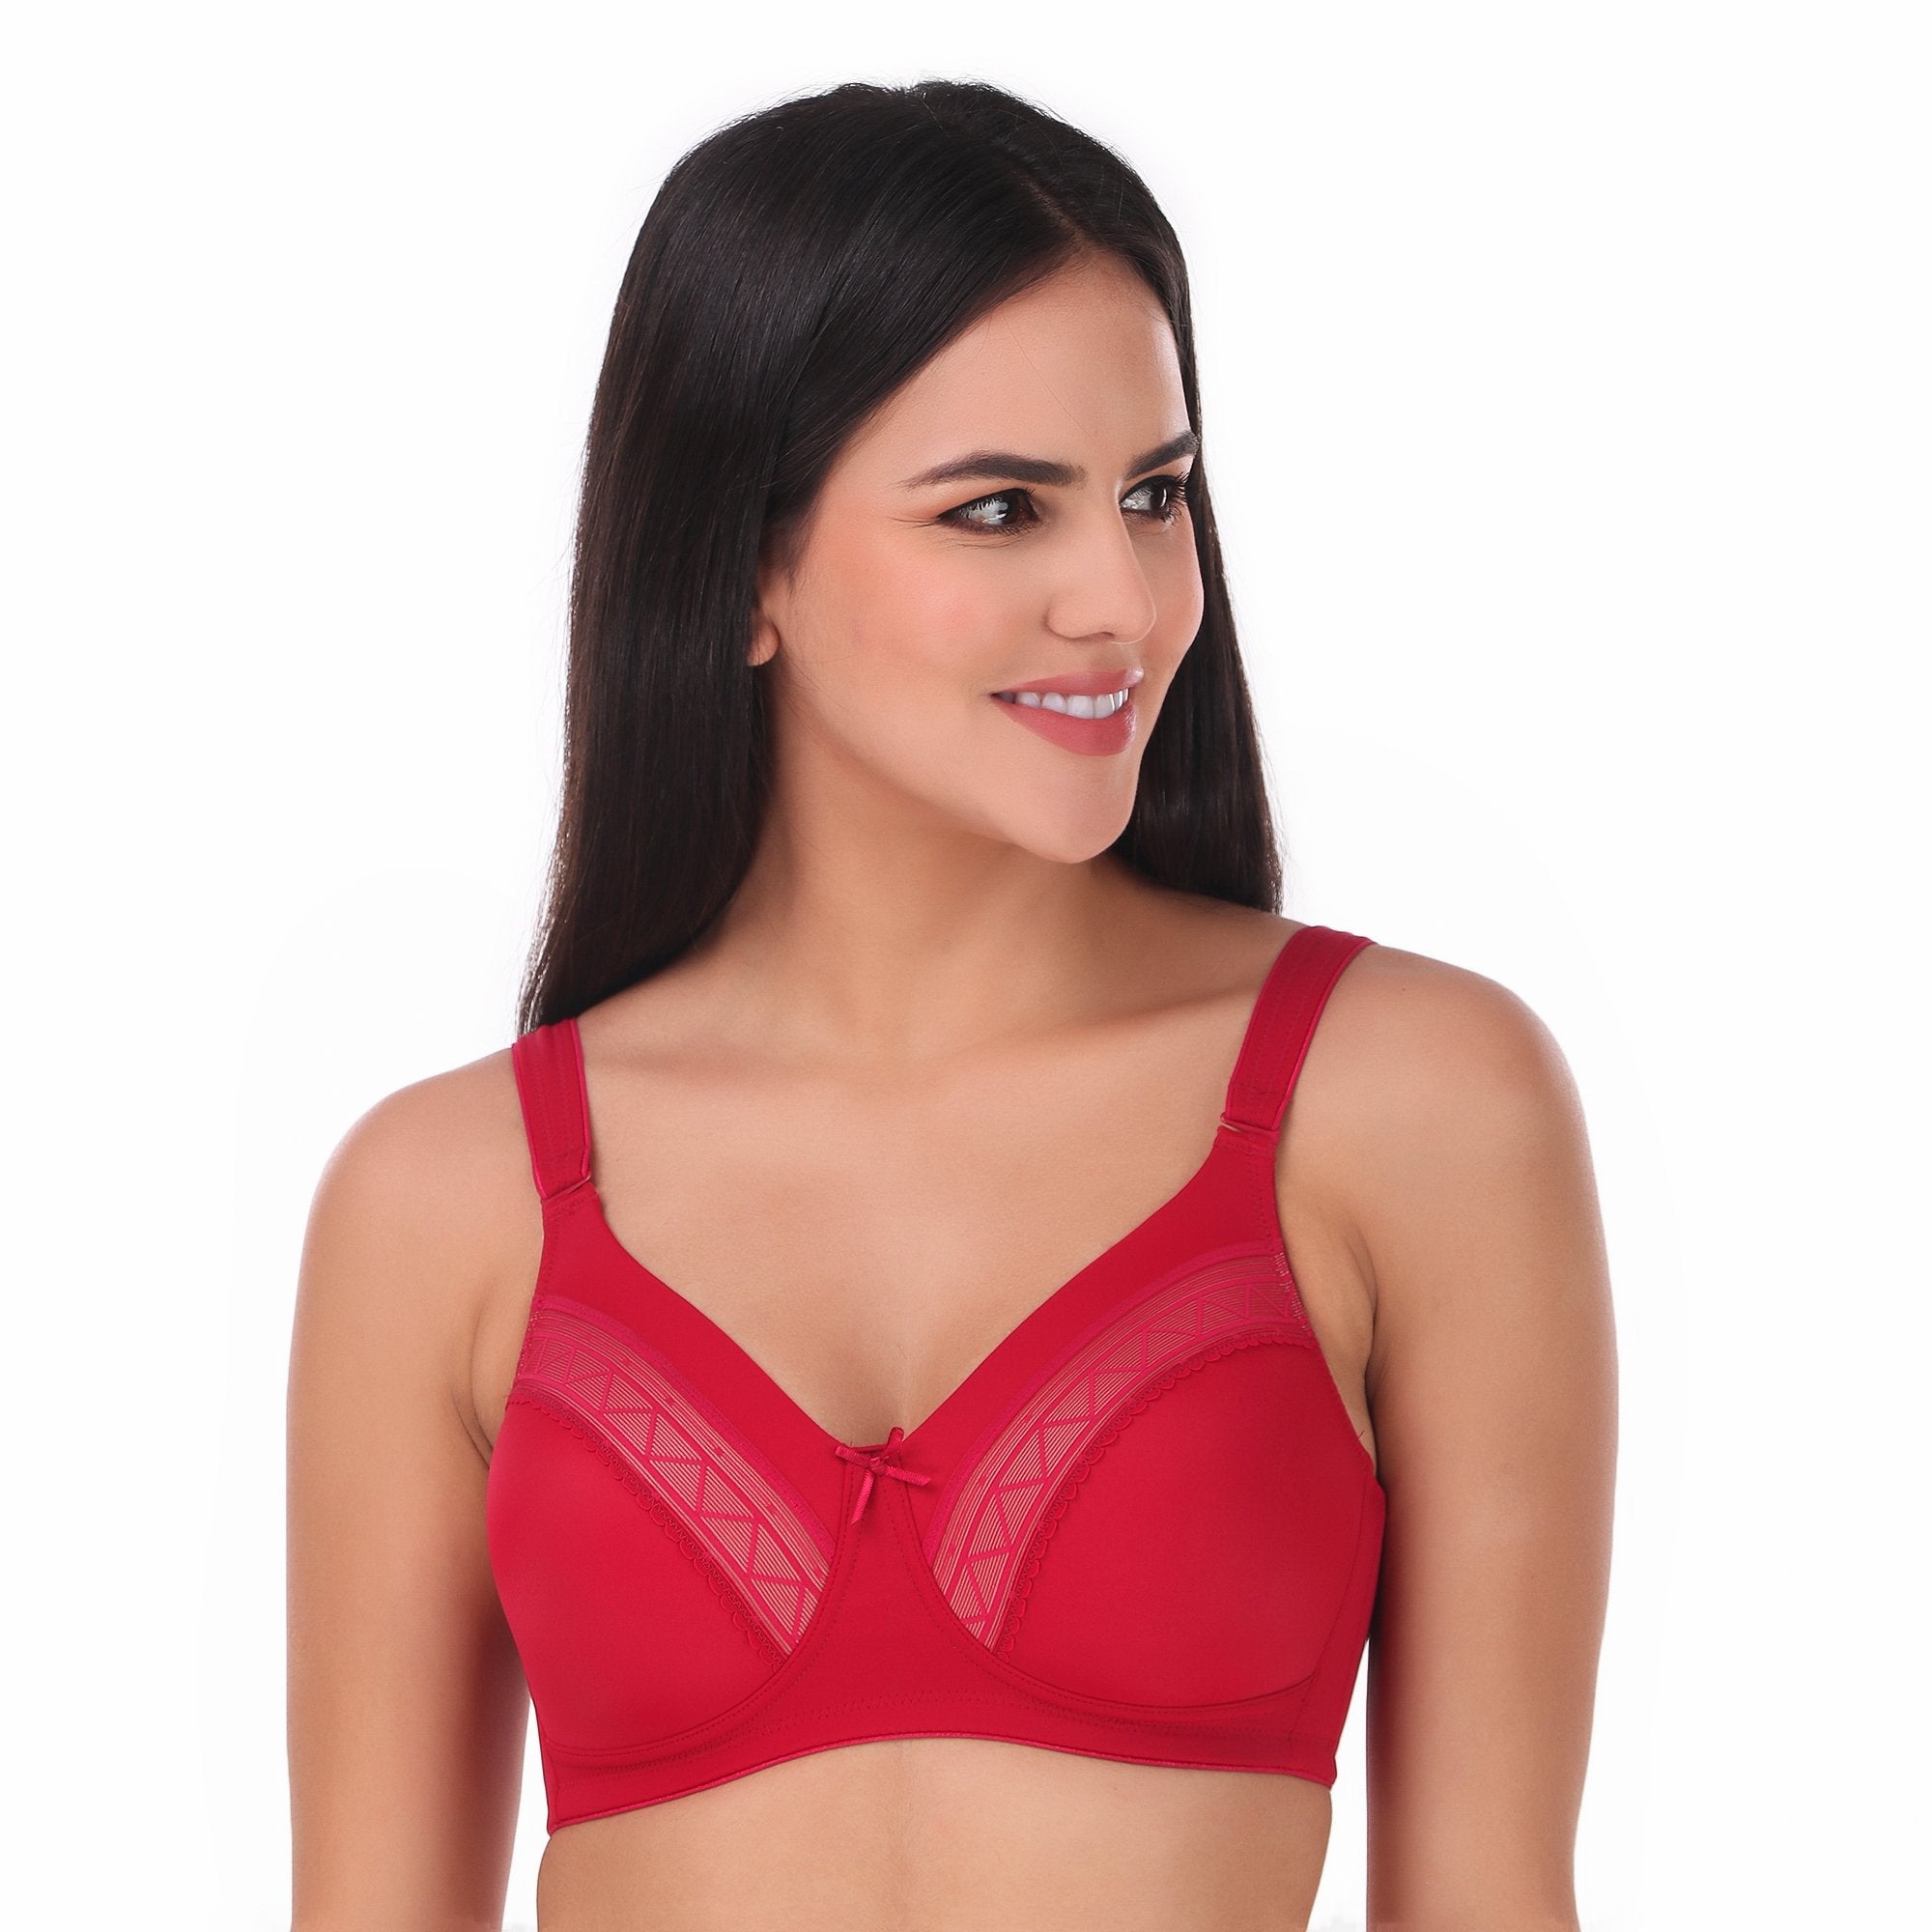 Buy Savvyy lingerie online - Switch to babydoll nightwear today!